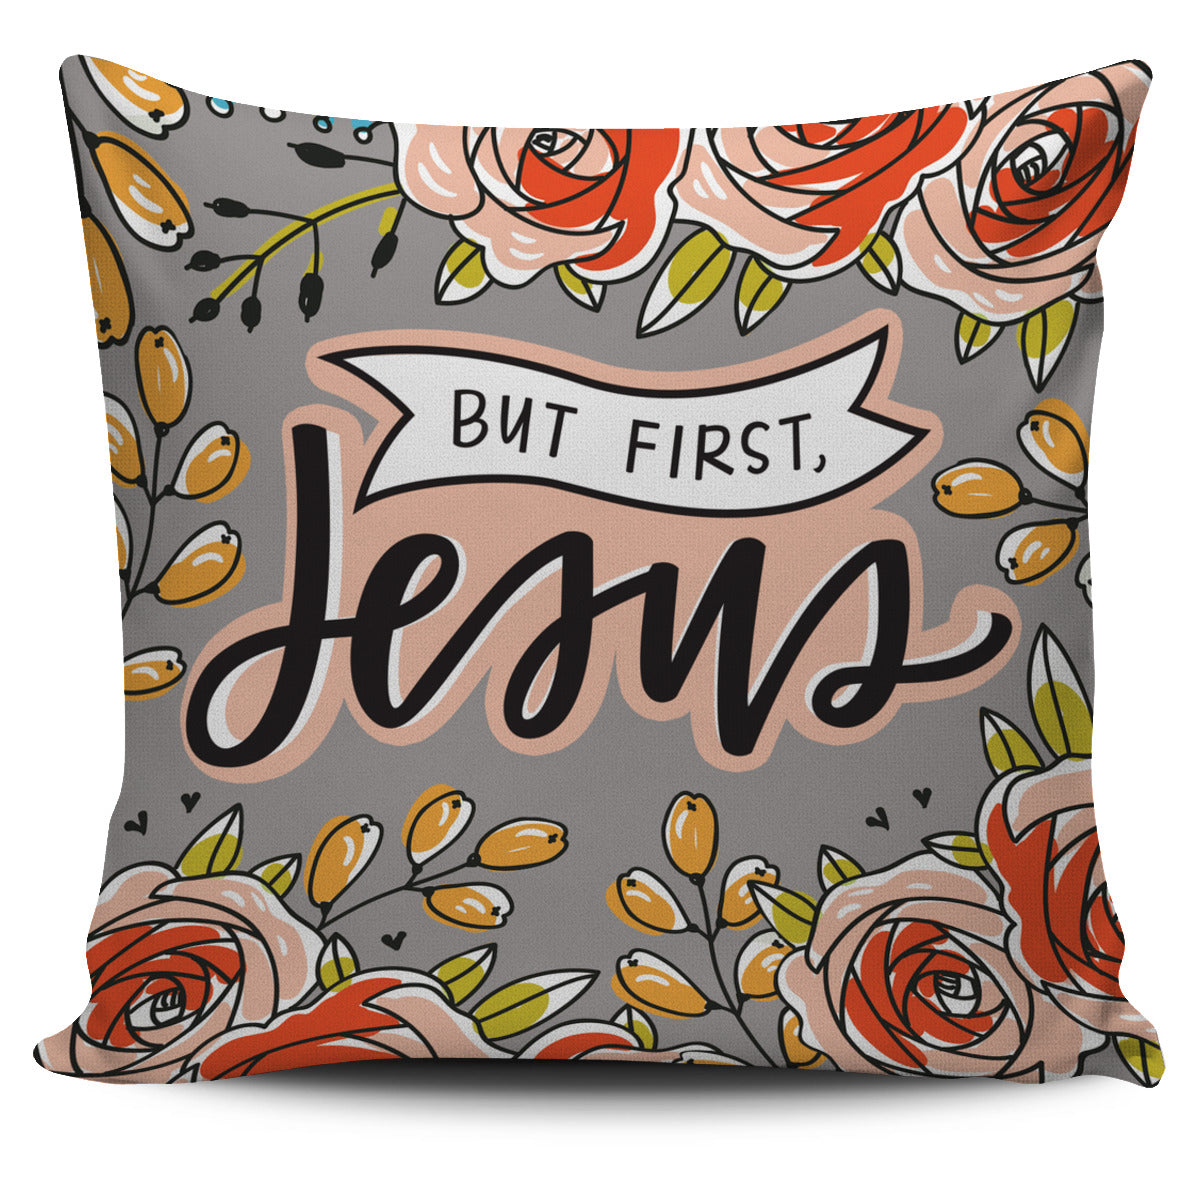 But First Coffee Pillow Cover